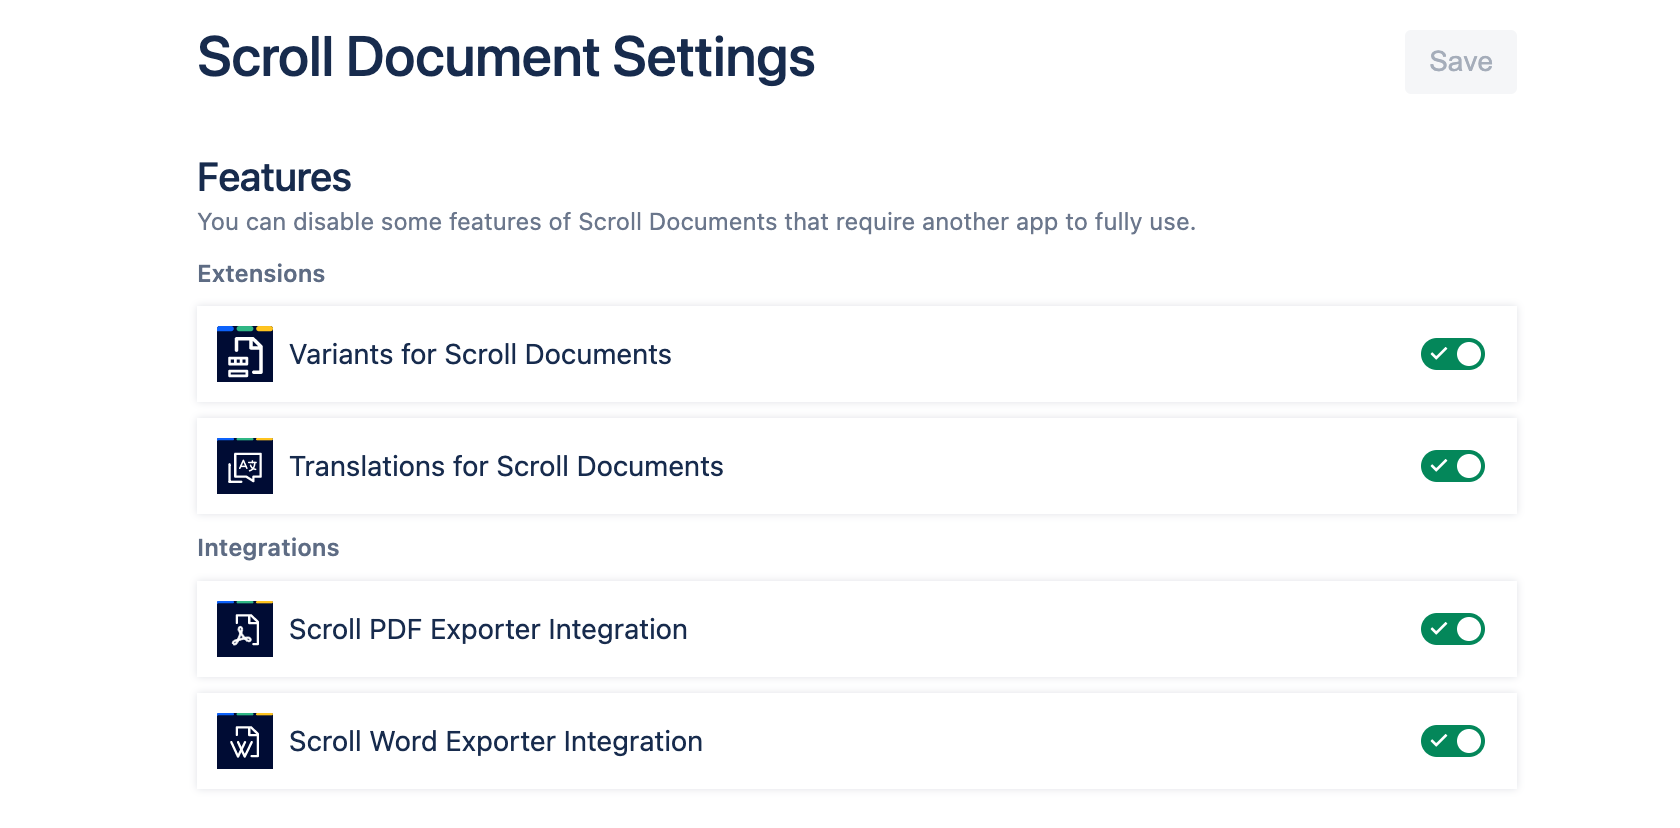 Scroll Documents settings with both extension apps enabled